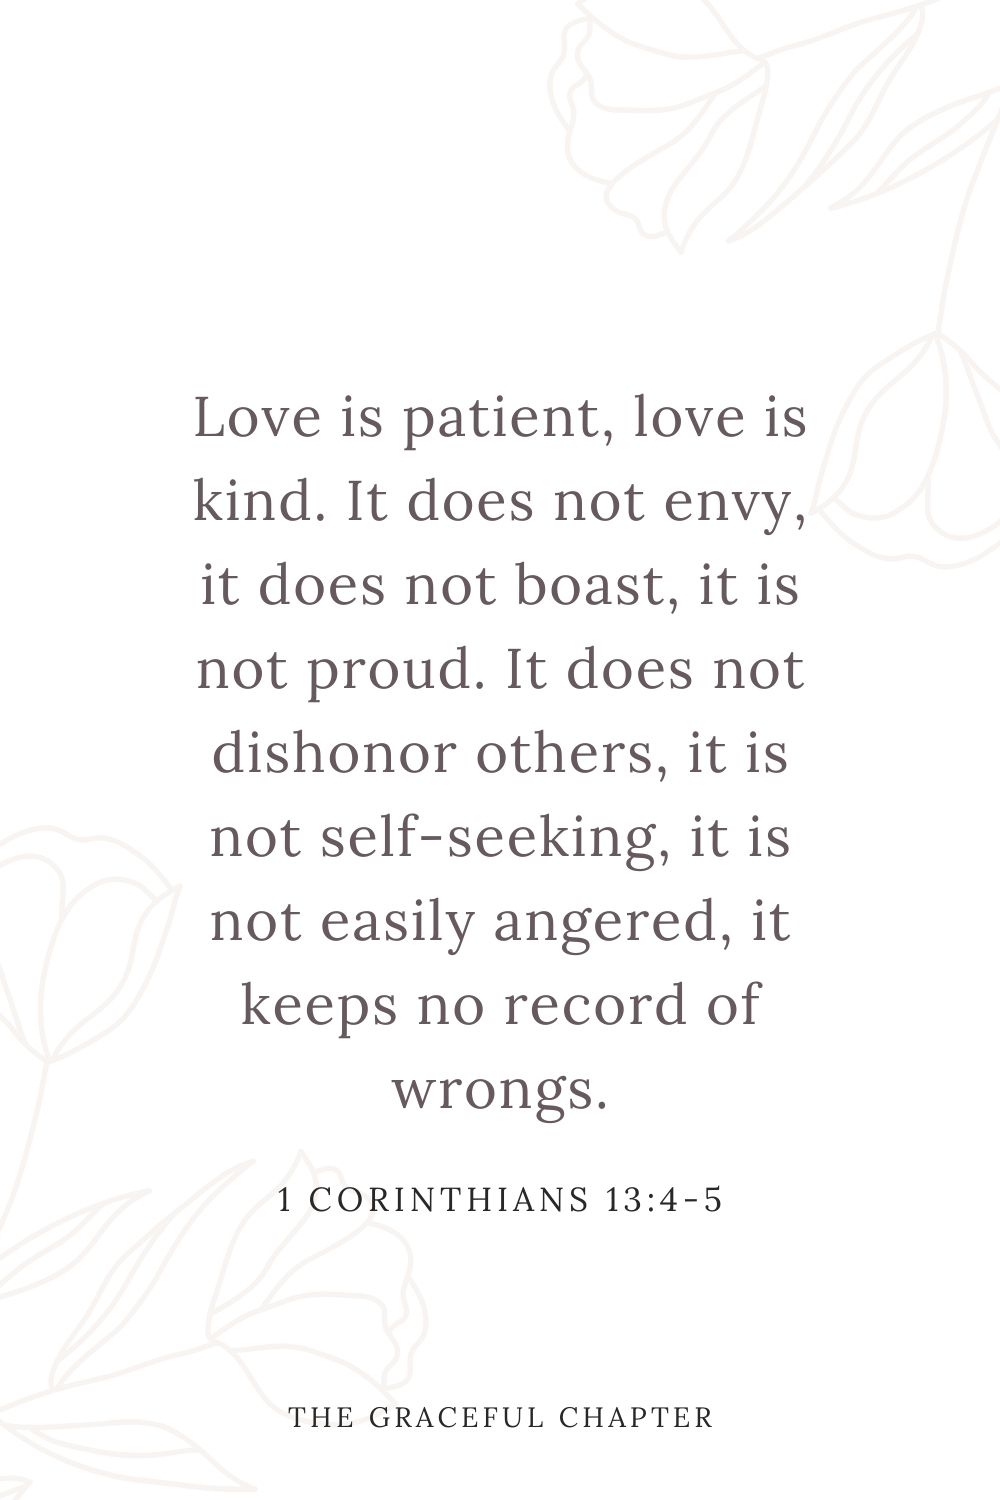 Love is patient, love is kind. It does not envy, it does not boast, it is not proud.  It does not dishonor others, it is not self-seeking, it is not easily angered, it keeps no record of wrongs. 1 Corinthians 13:4-5